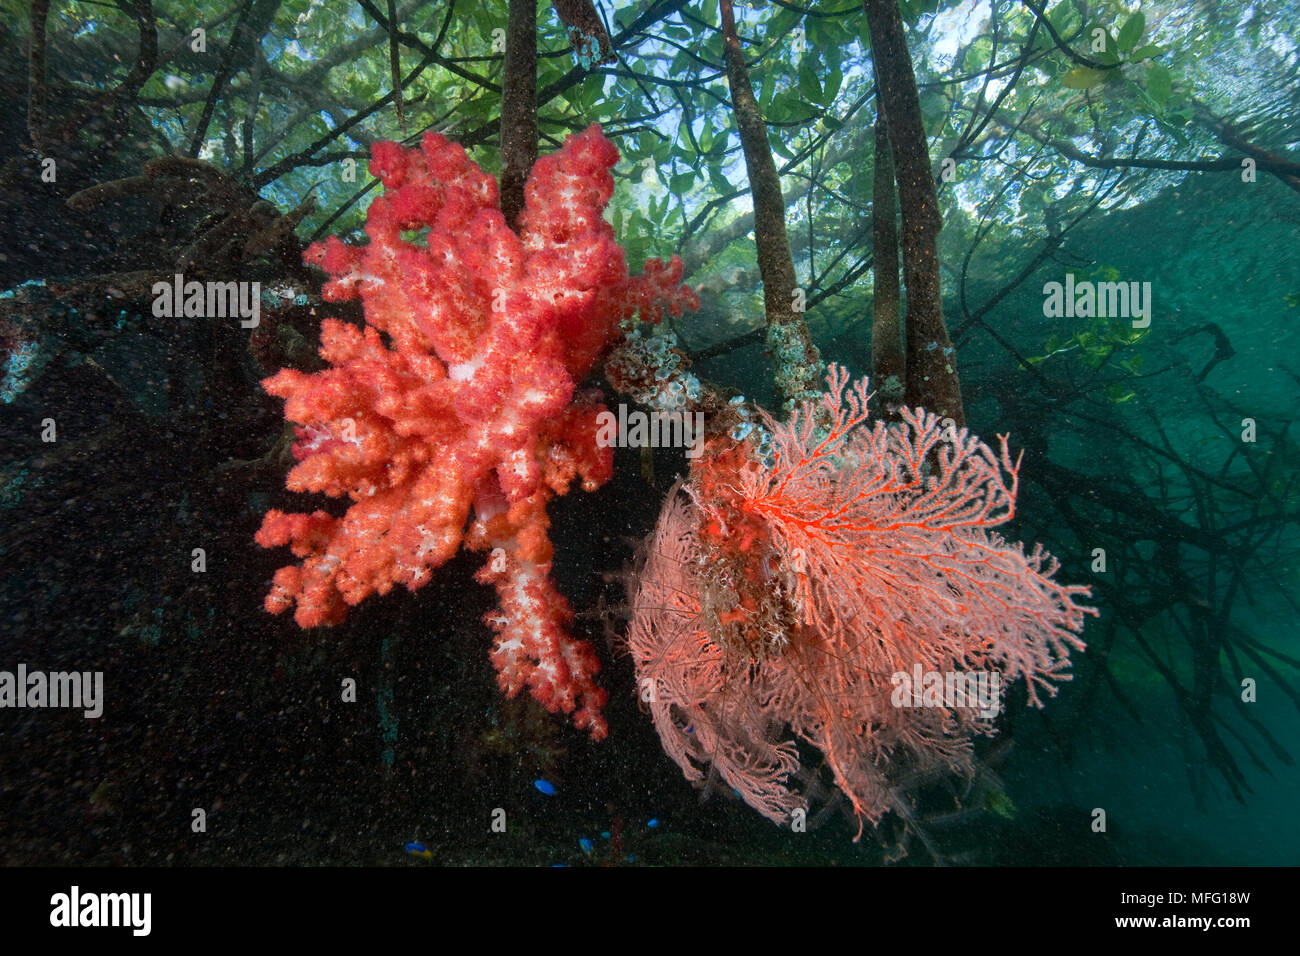 Soft coral, Dendronephthya sp. and Sea fan, Acabaria sp. on mangrove, dive site: exploratory dive, Blue water mangrove, Raja Ampat, Irian Jaya, West P Stock Photo